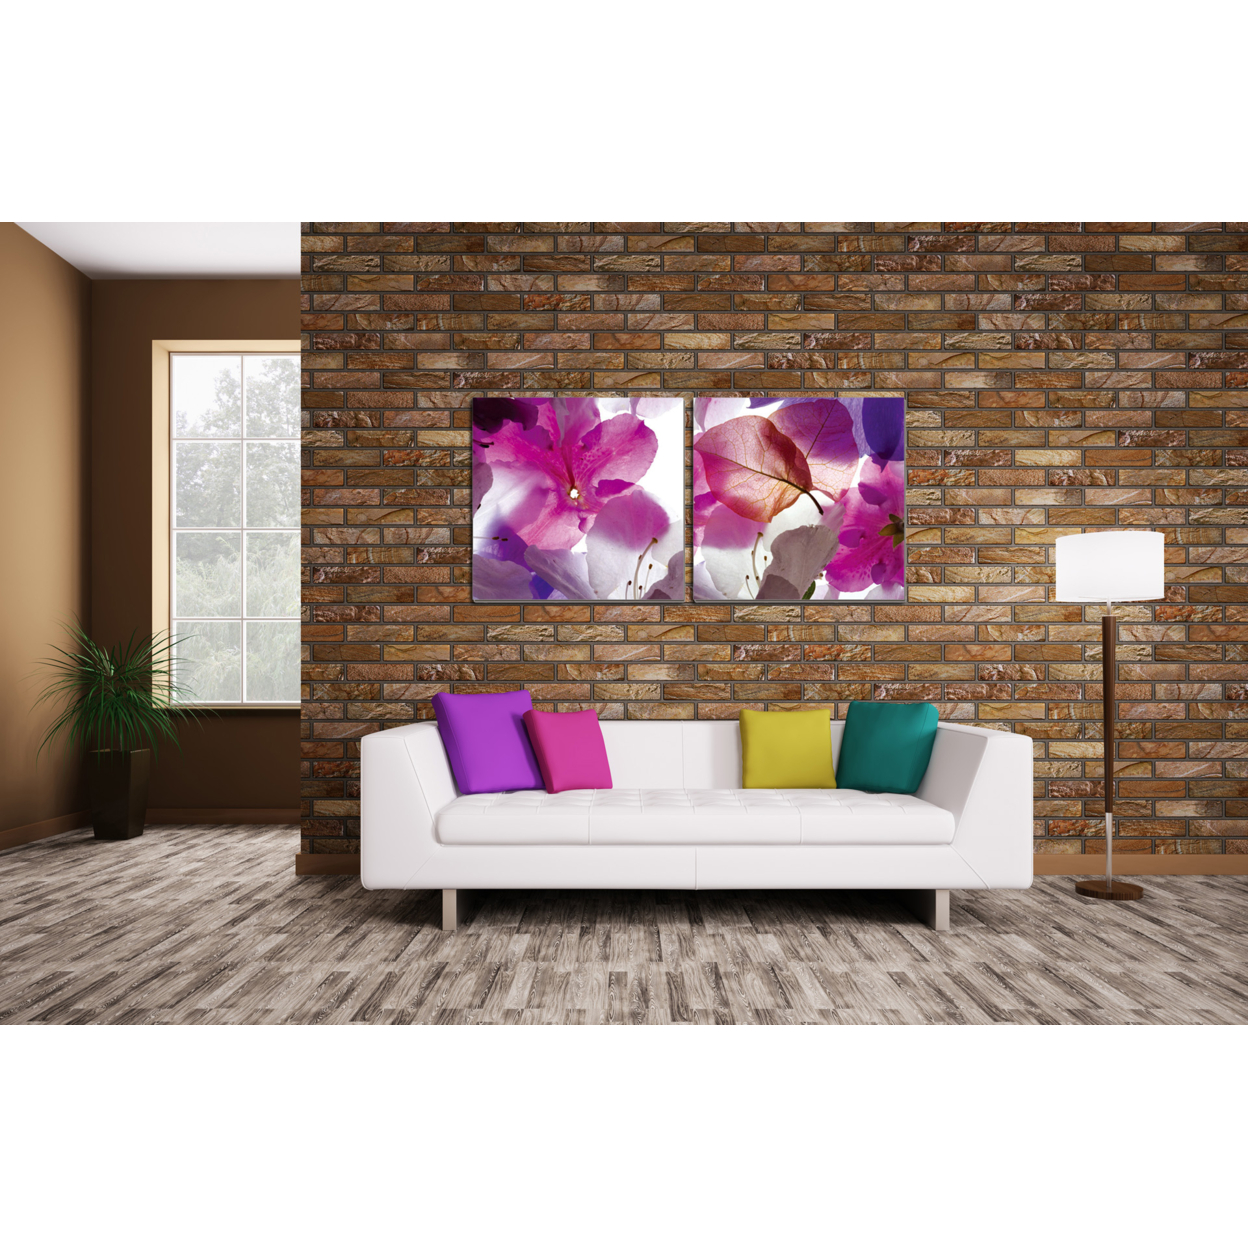 Orchid 2 piece Wrapped Canvas Wall Art Print 27.5x55 inches